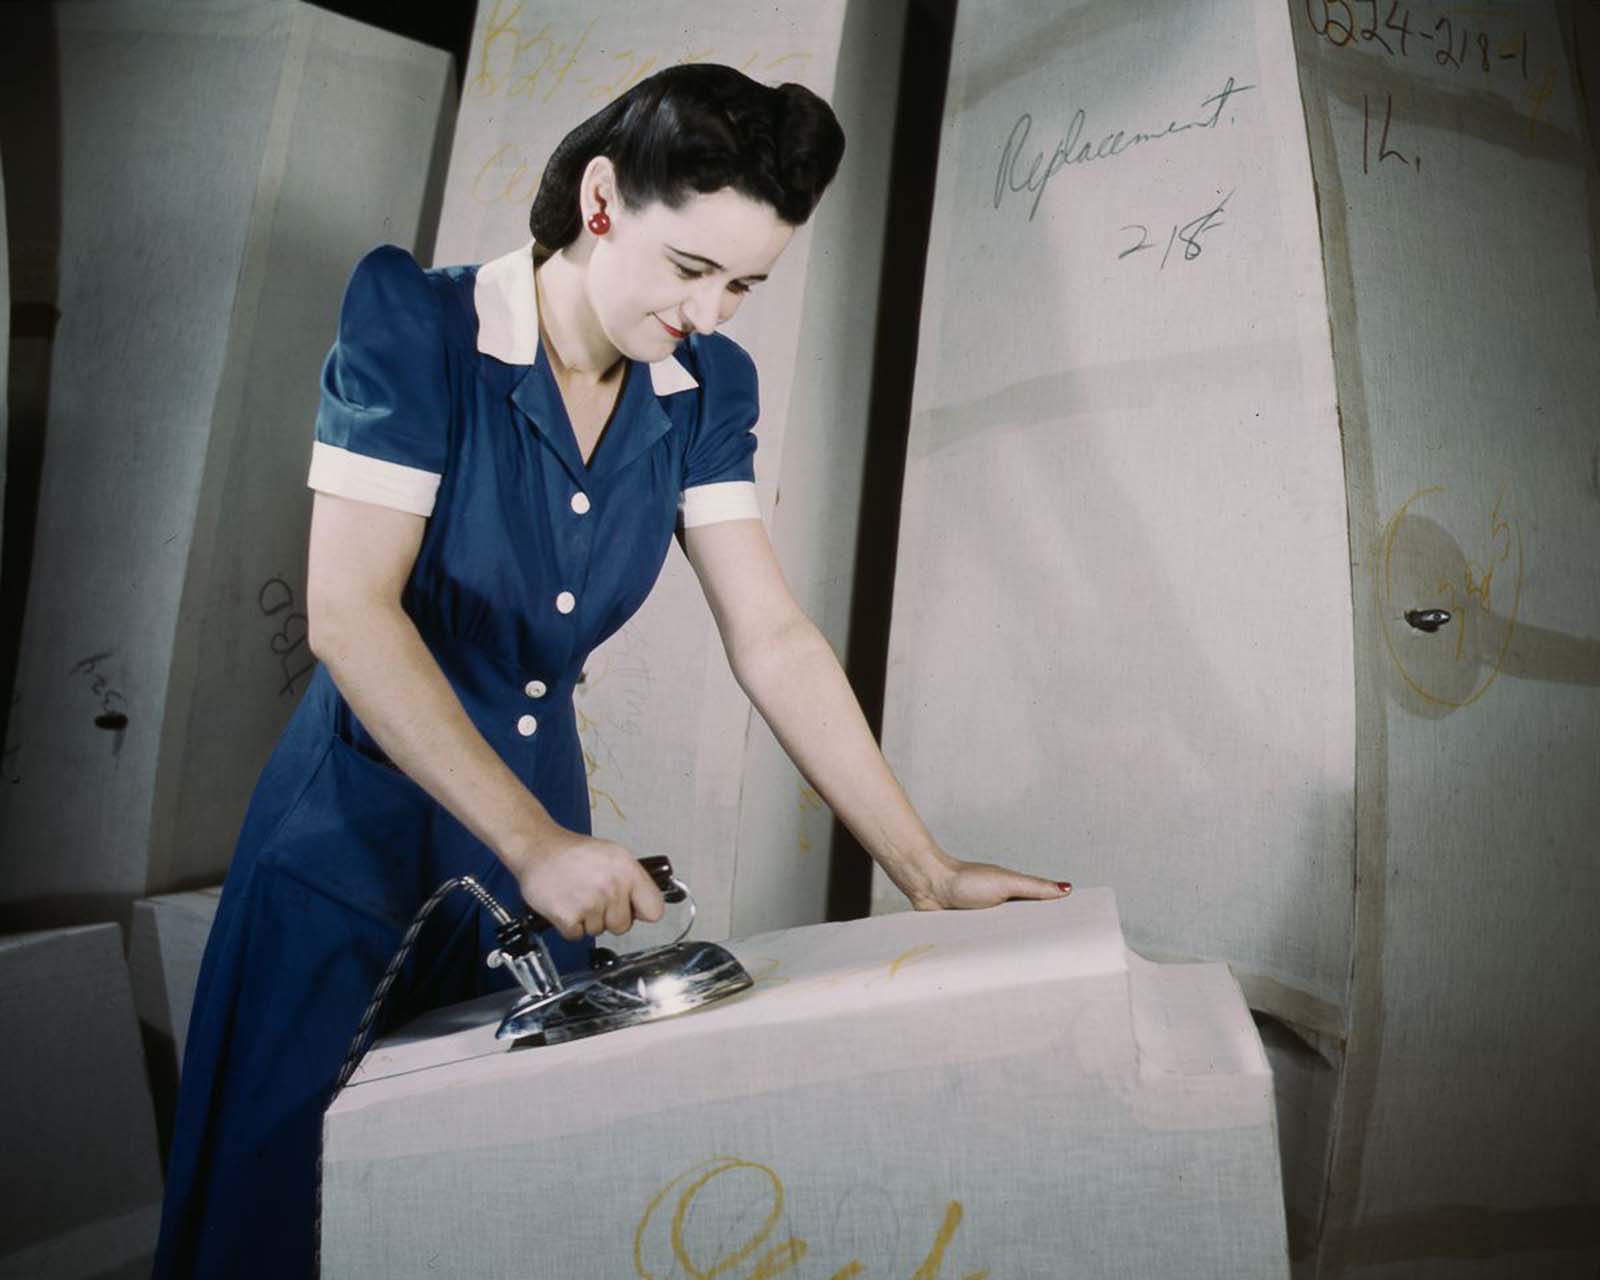 A worker irons at a factory for self-sealing gas tanks owned by the Goodyear Tire and Rubber Co. in Akron, Ohio, 1941.